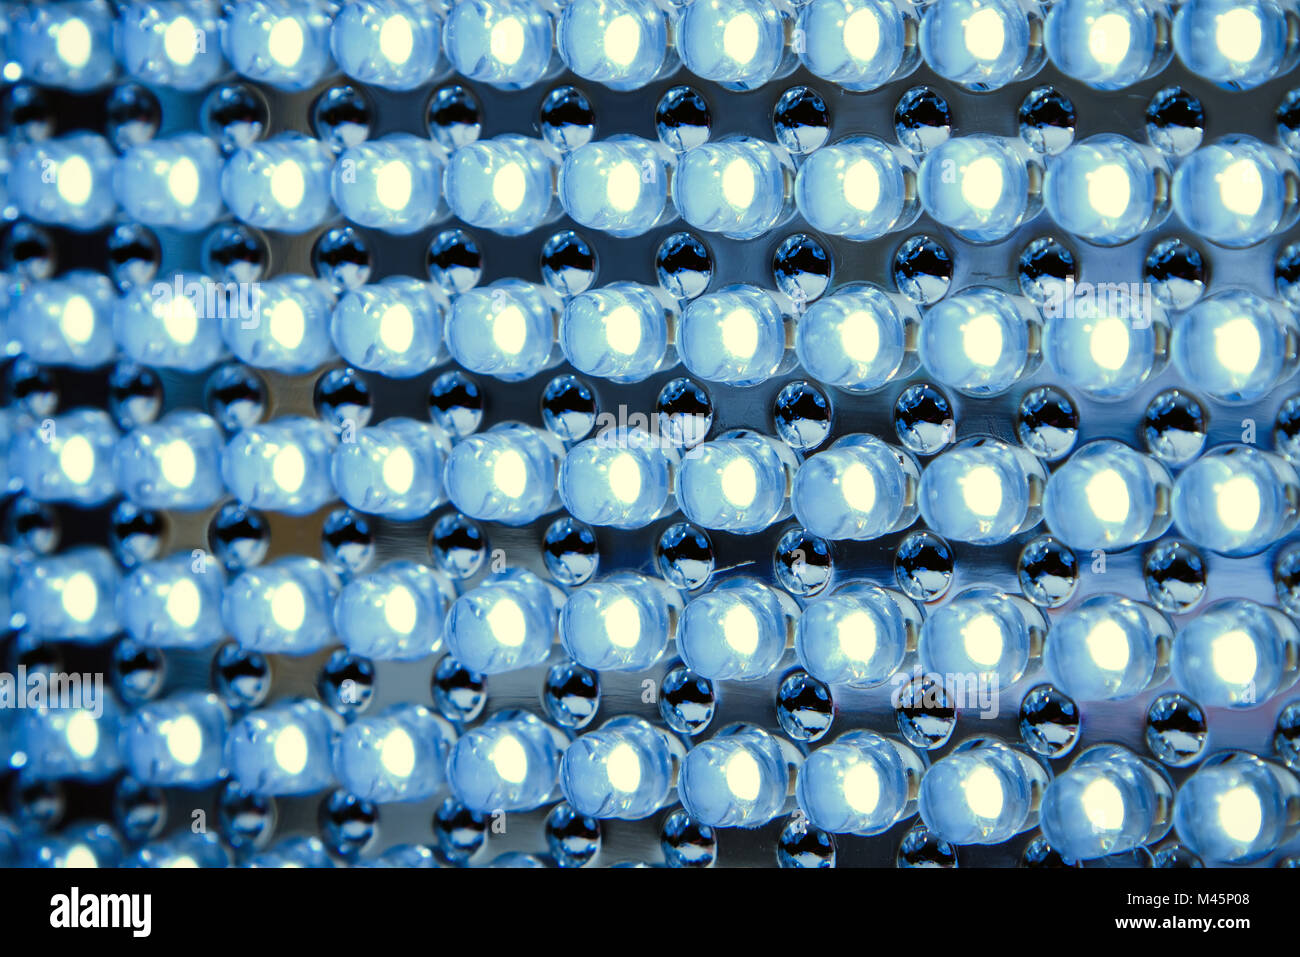 Led panel in fluorescent light close up Stock Photo